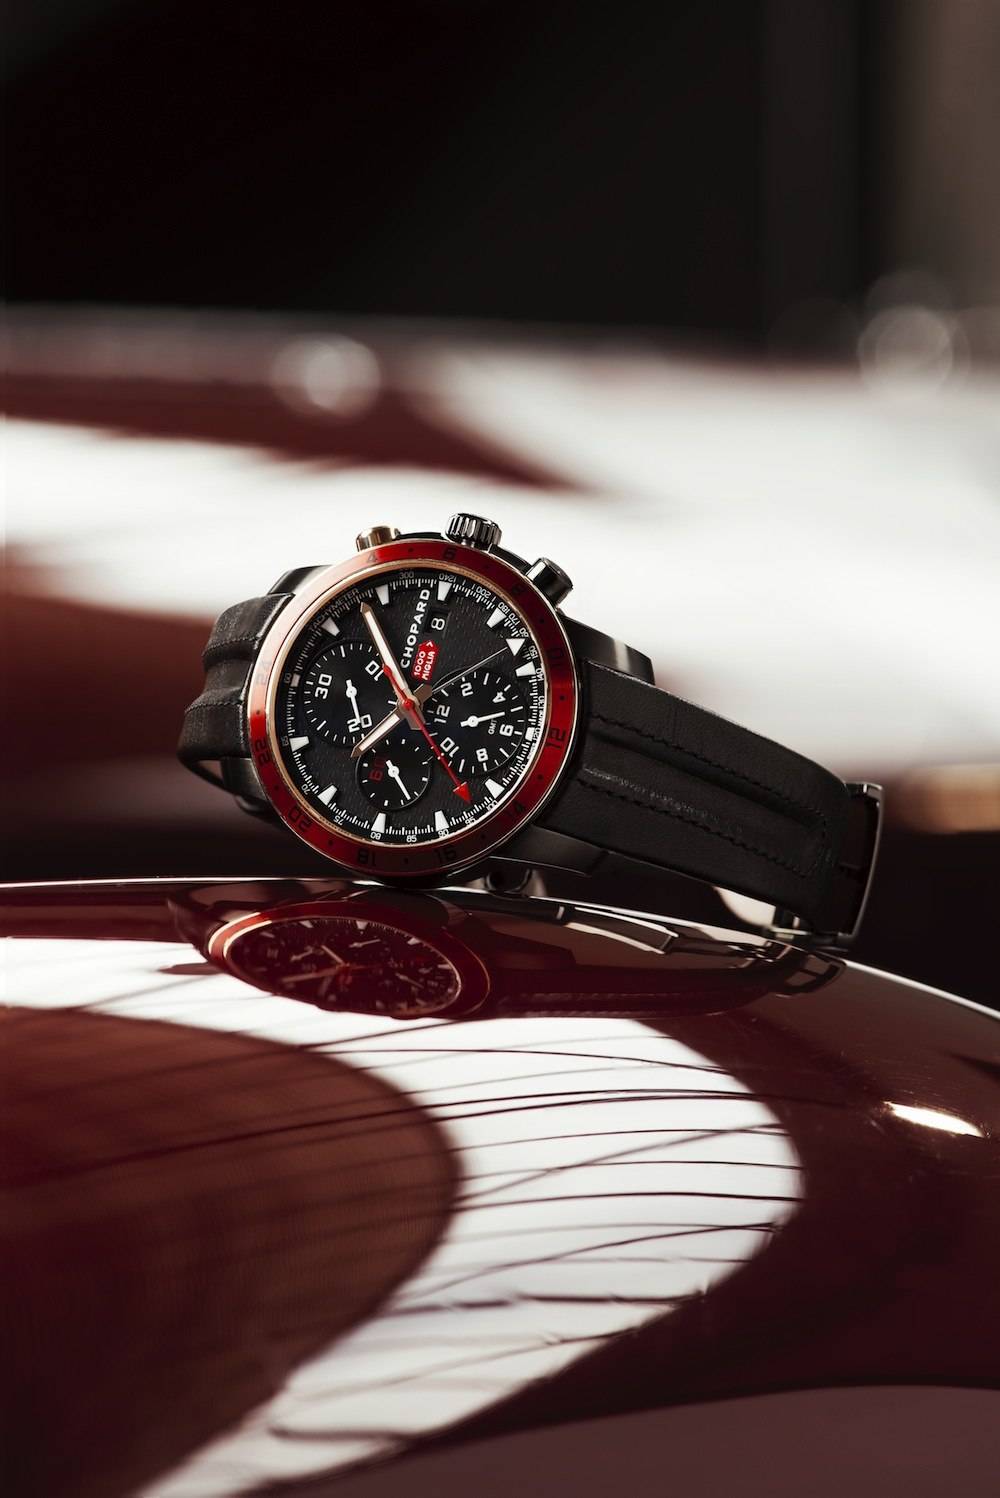 CHOPARD MILLE MIGLIA Zagato Chronograph : Watch of the Week